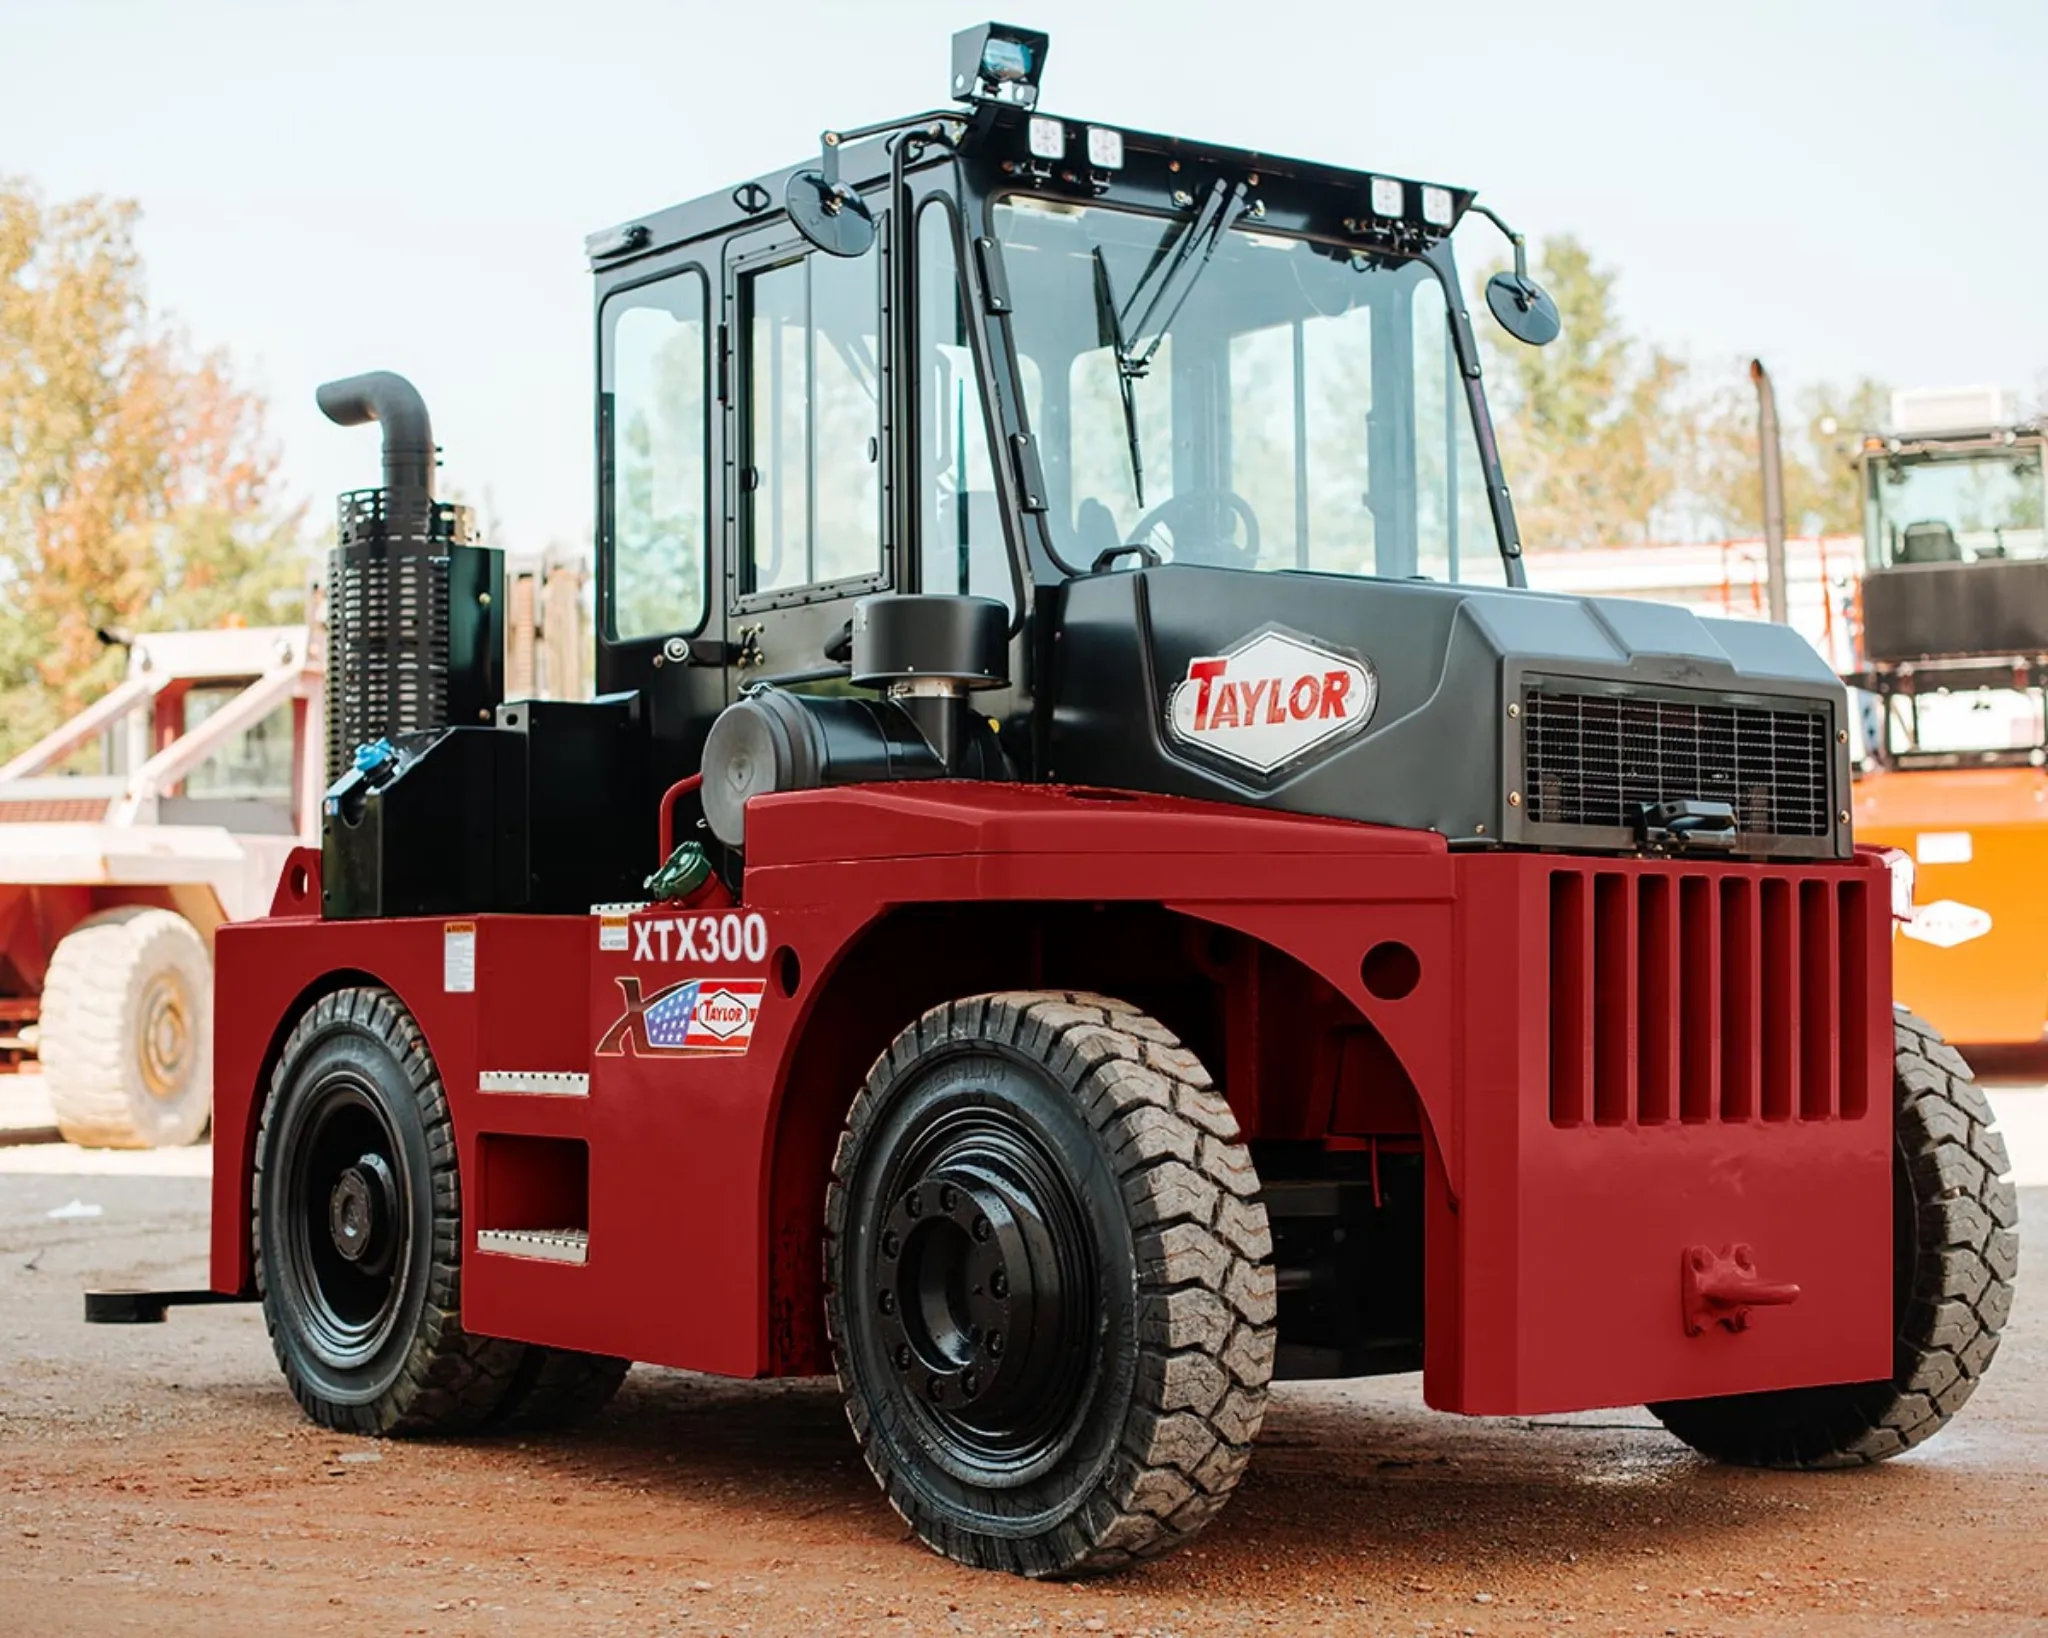 Taylor XTX-300 Tow Tractor